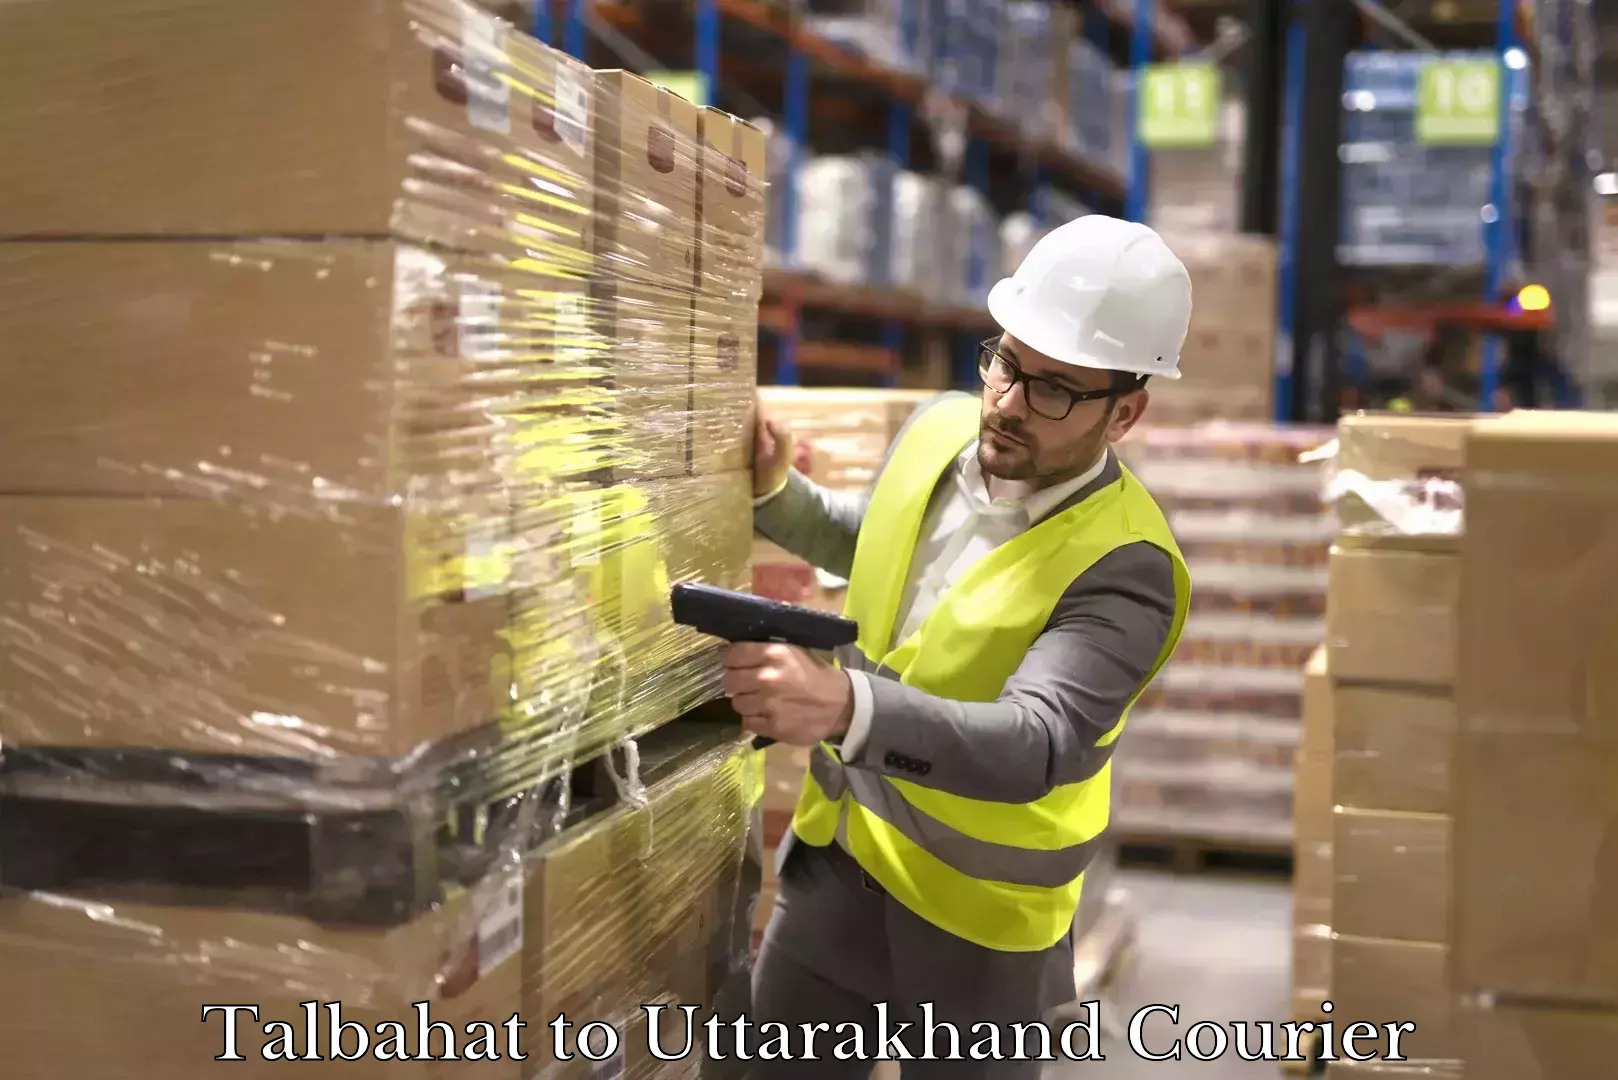 Reliable parcel services Talbahat to Uttarakhand